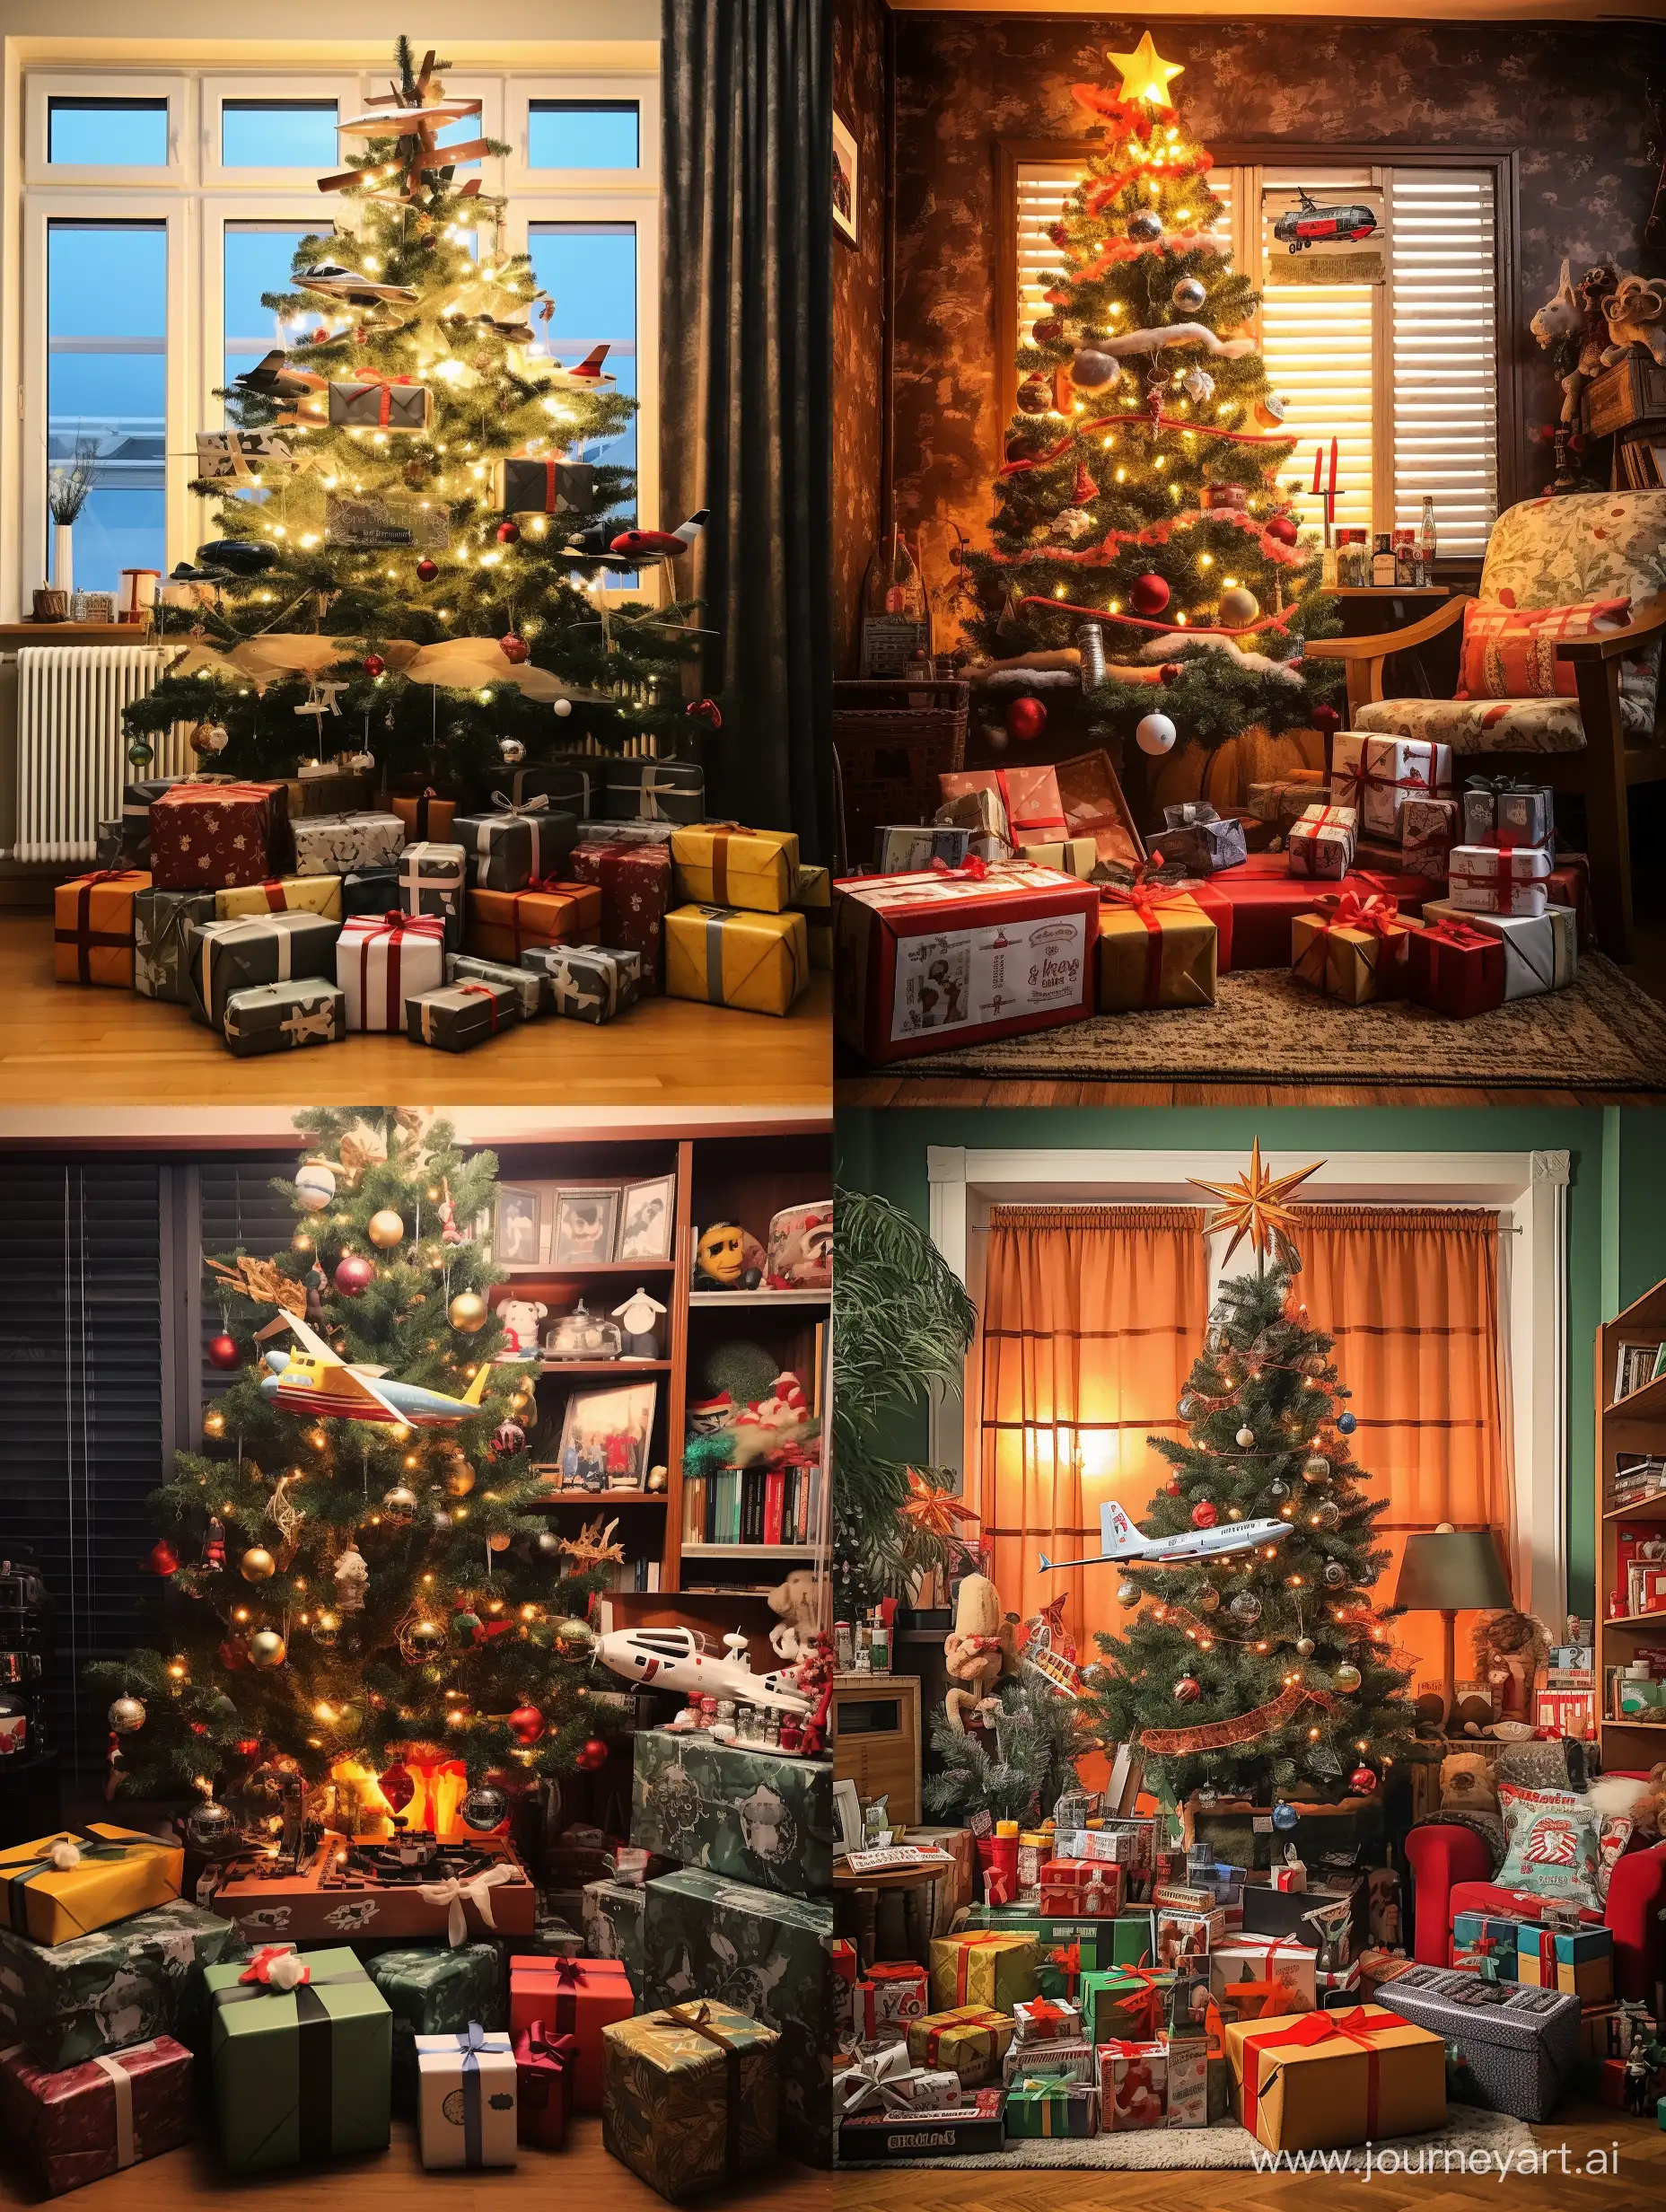 Festive-Scale-Model-Christmas-Detailed-Miniature-Airplanes-Under-the-Tree